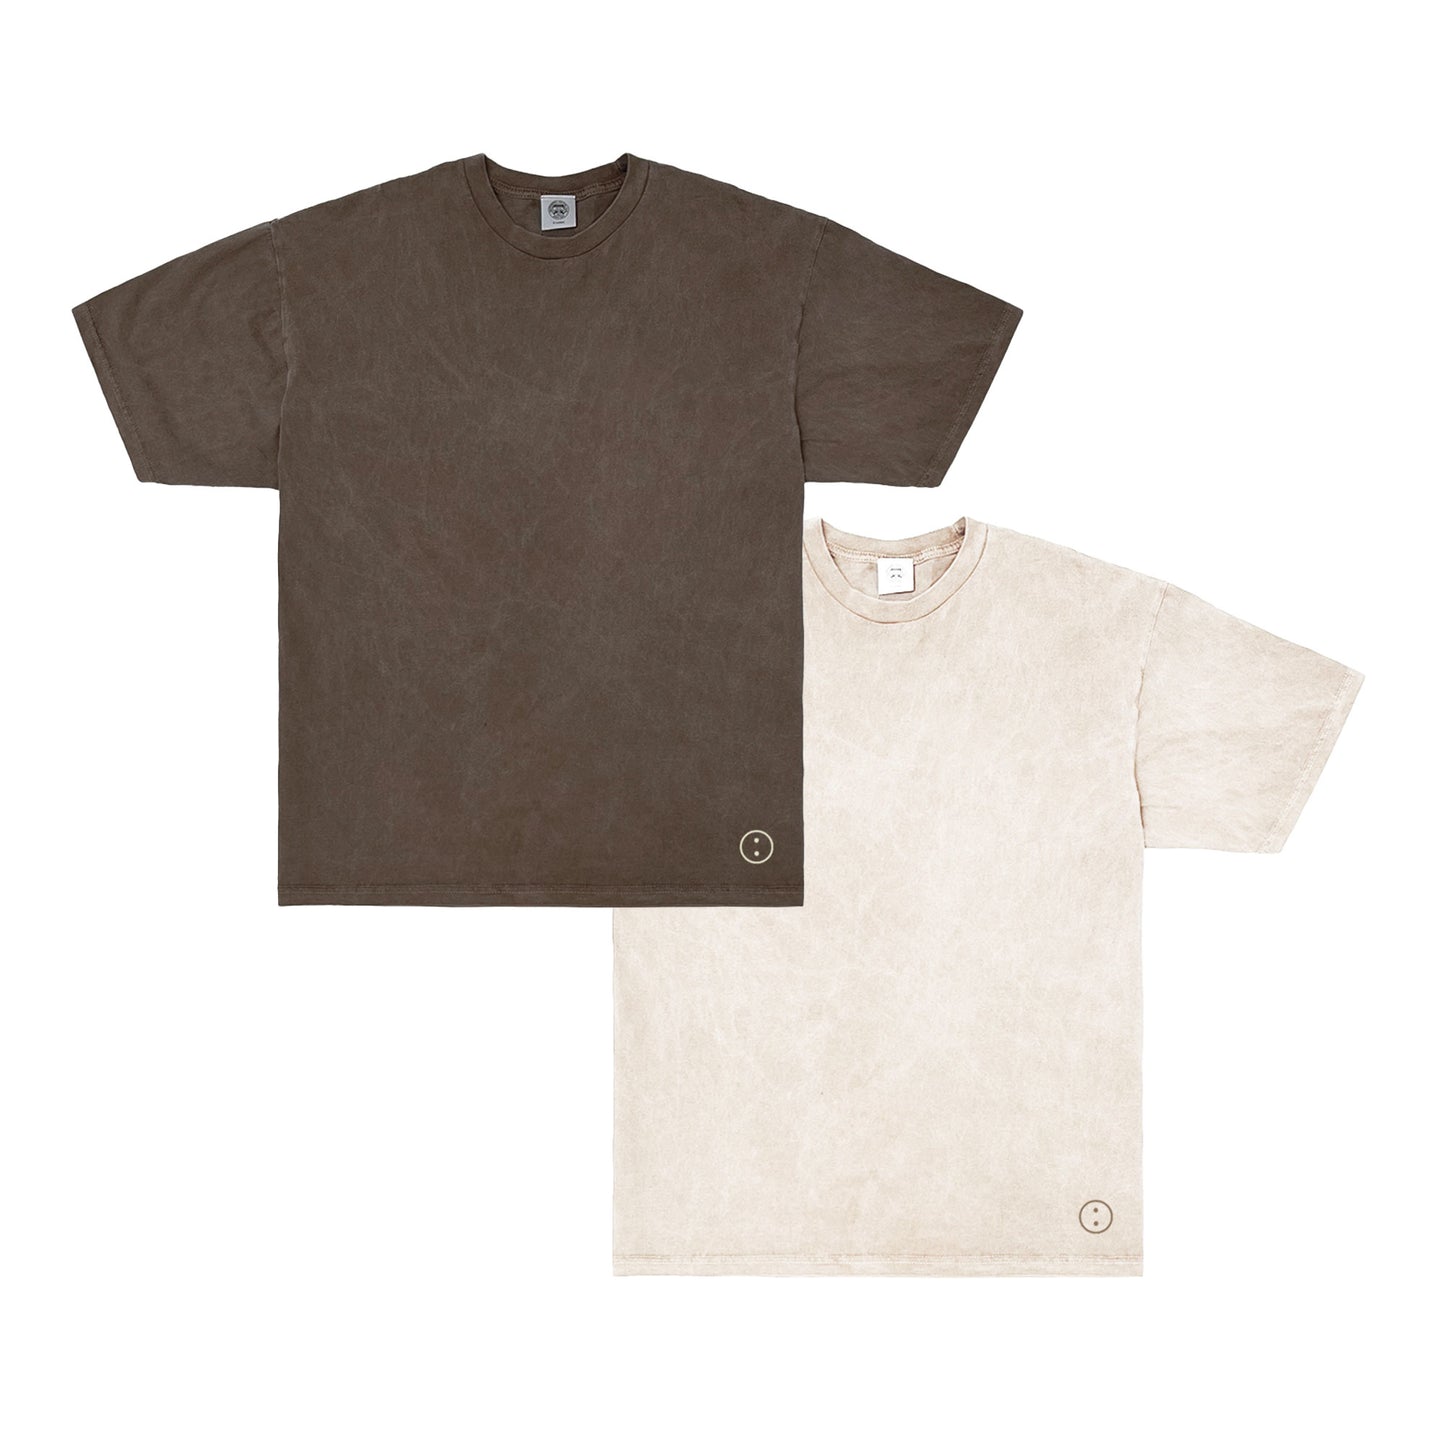 Essentials Vintage Washed Tee Twinpack - Cocoa/Ivory